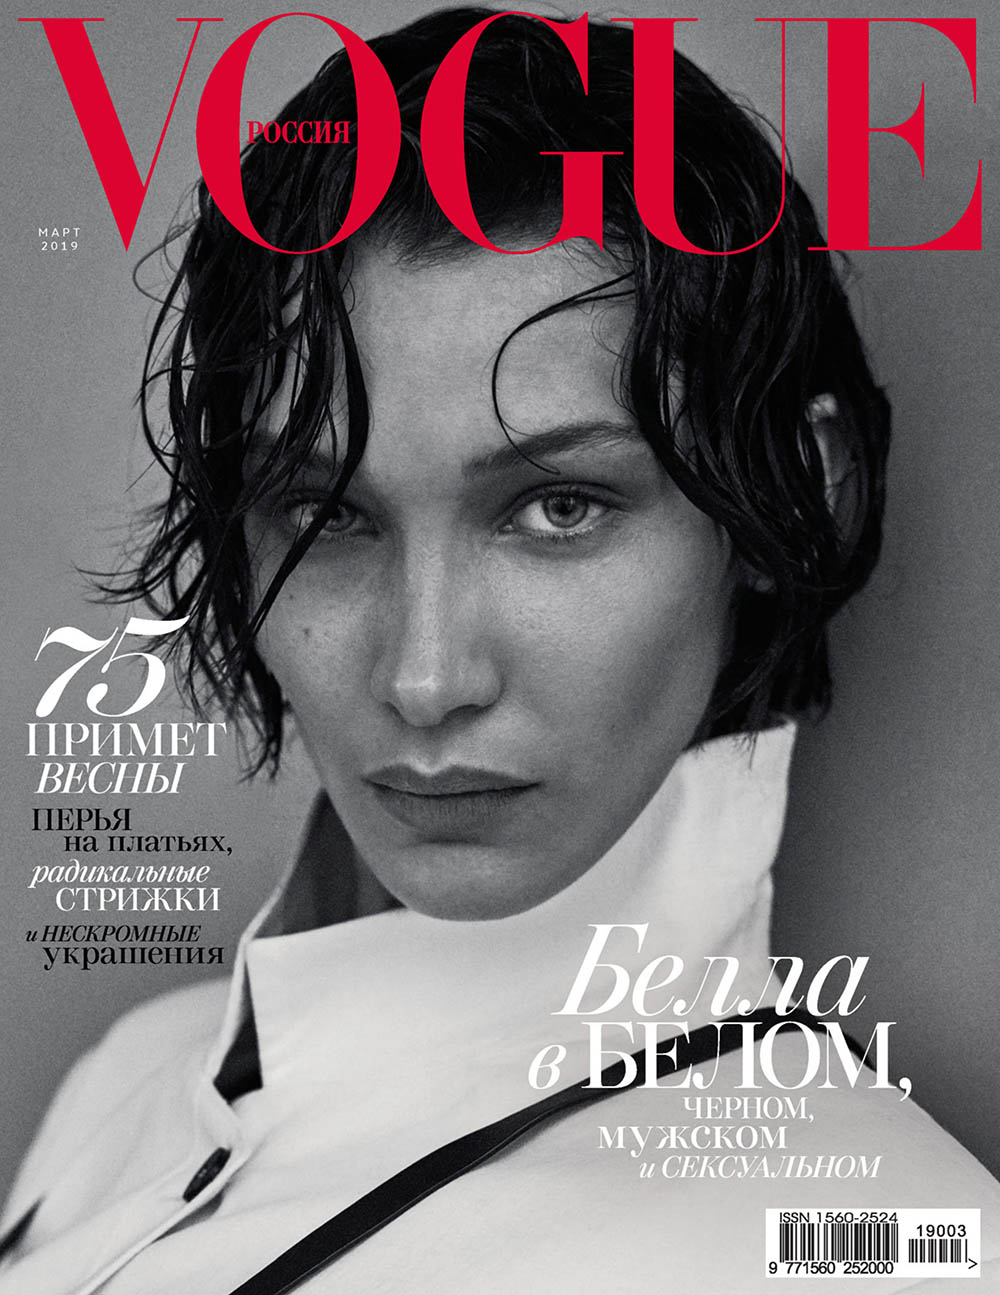 Bella Hadid covers Vogue Russia March 2019 by Giampaolo Sgura